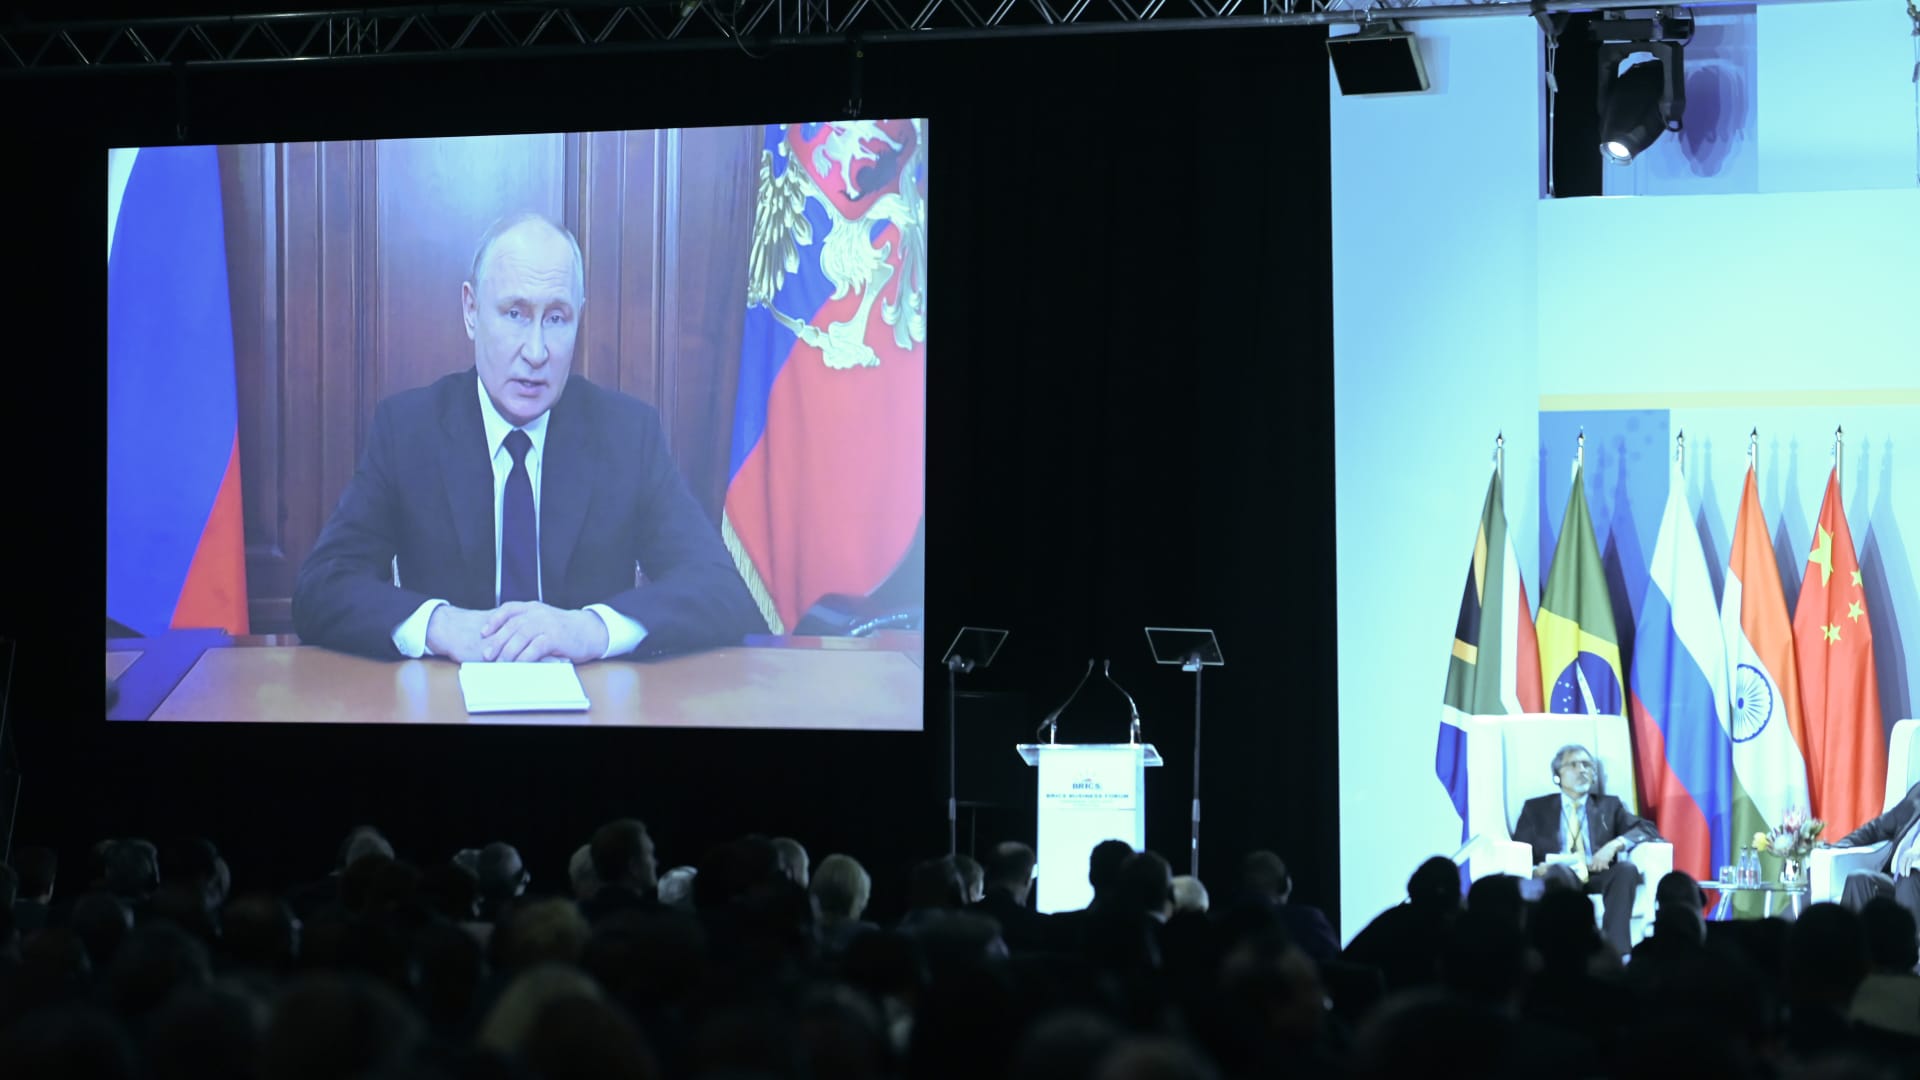 Vladimir Putin, Russia's president, speaks by video link during the BRICS business forum on the opening day of the BRICS summit at the Sandton Convention Centre in the Sandton district of Johannesburg, South Africa, on Aug. 22, 2023.